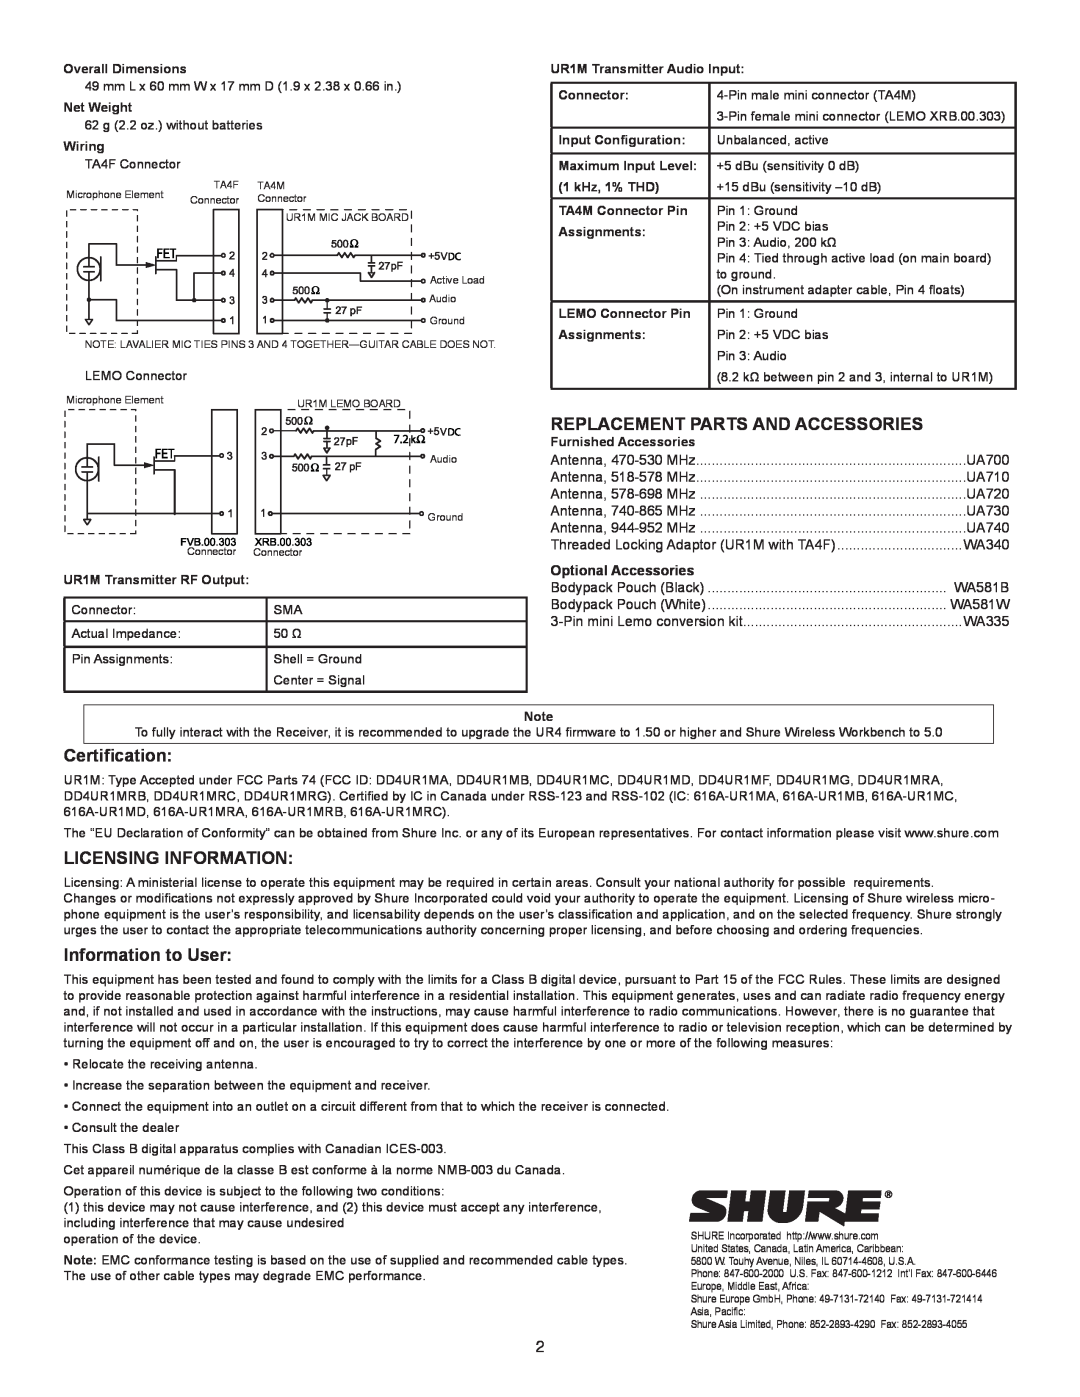 Shure UR1M Replacement Parts And Accessories, Certification, Licensing Information, Information to User, UA700, UA710 